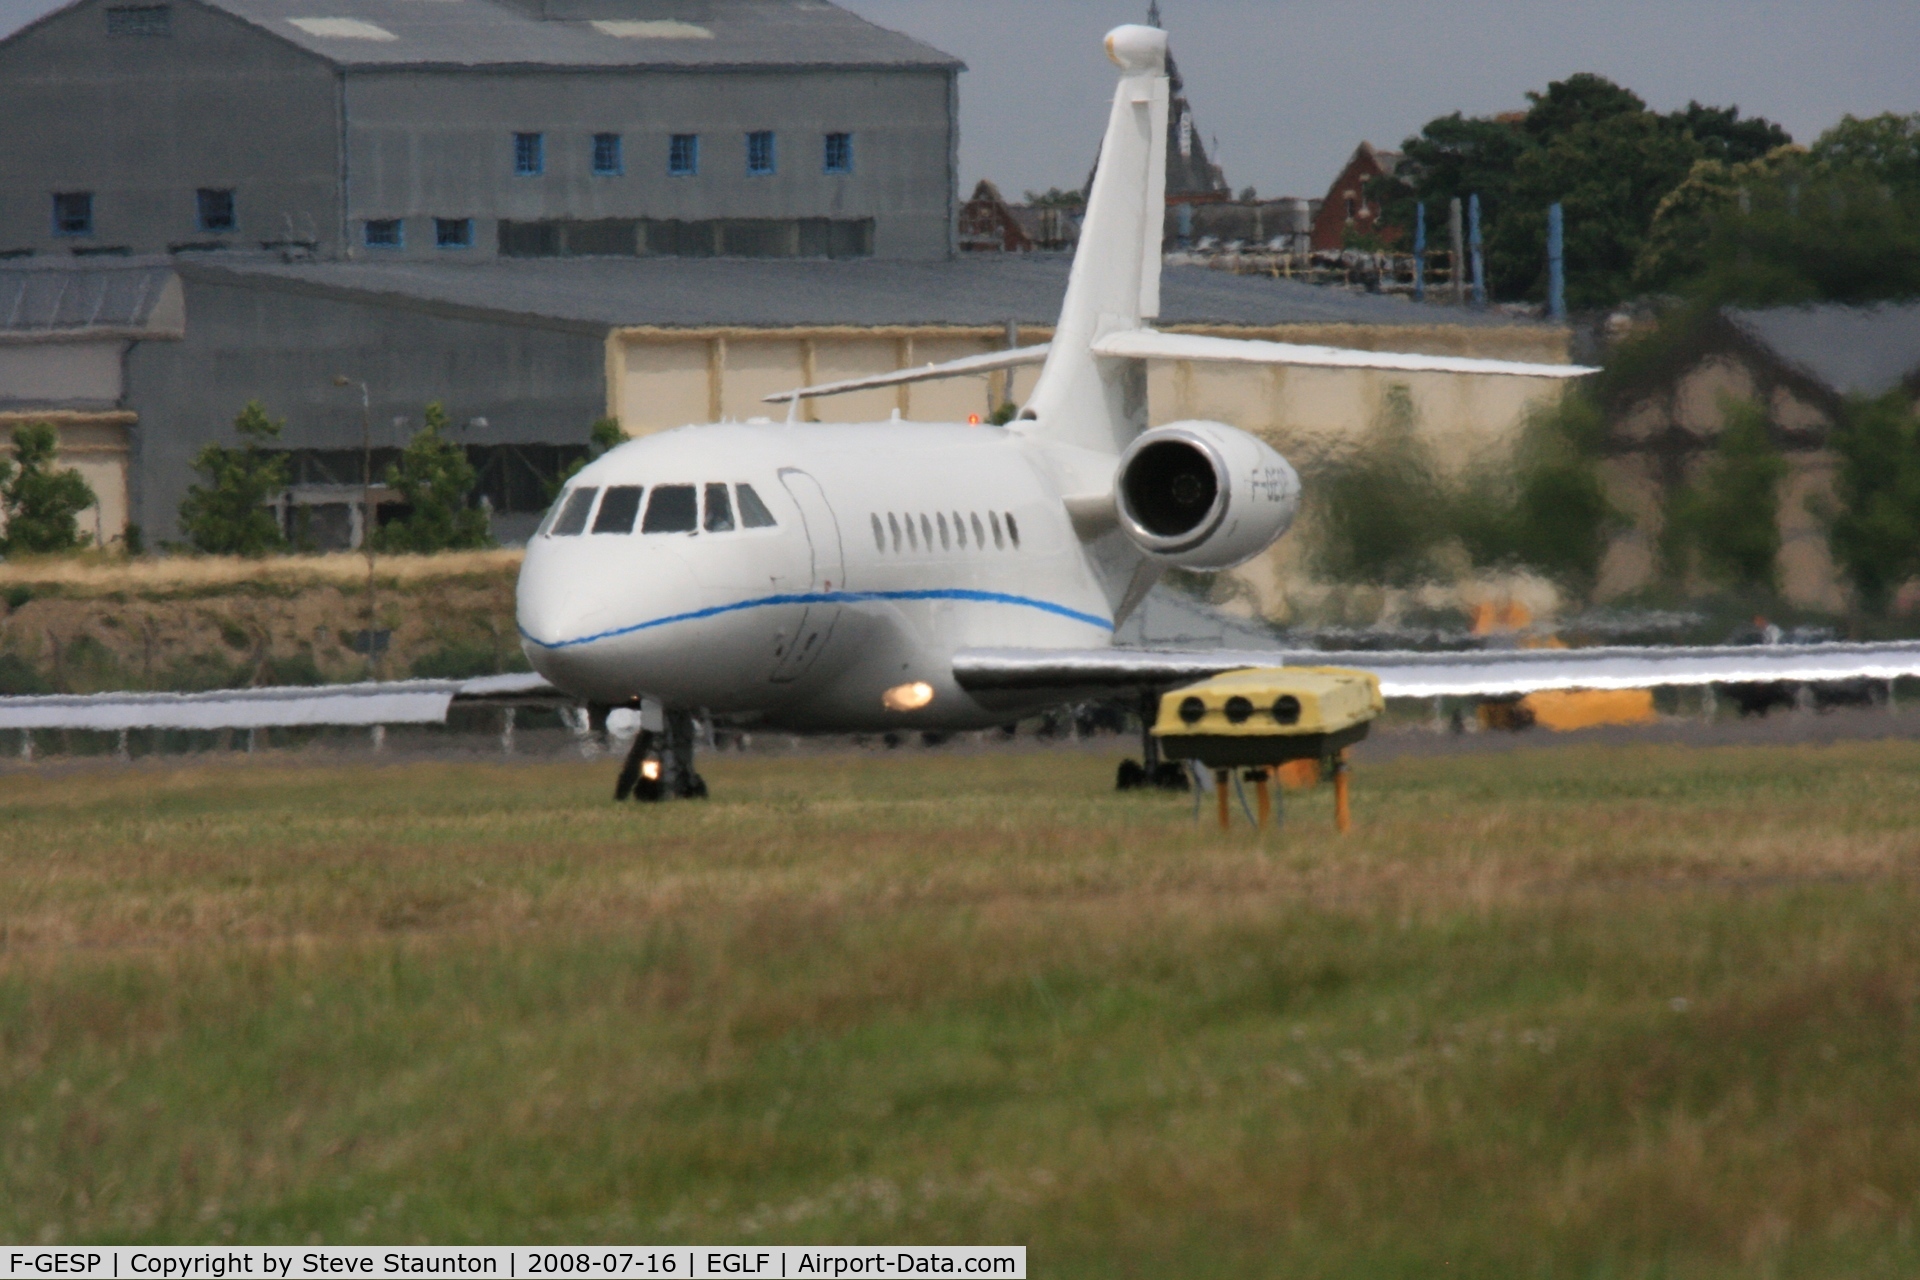 F-GESP, 2000 Dassault Falcon 2000 C/N 119, Taken at Farnborough Airshow on the Wednesday trade day, 16th July 2009